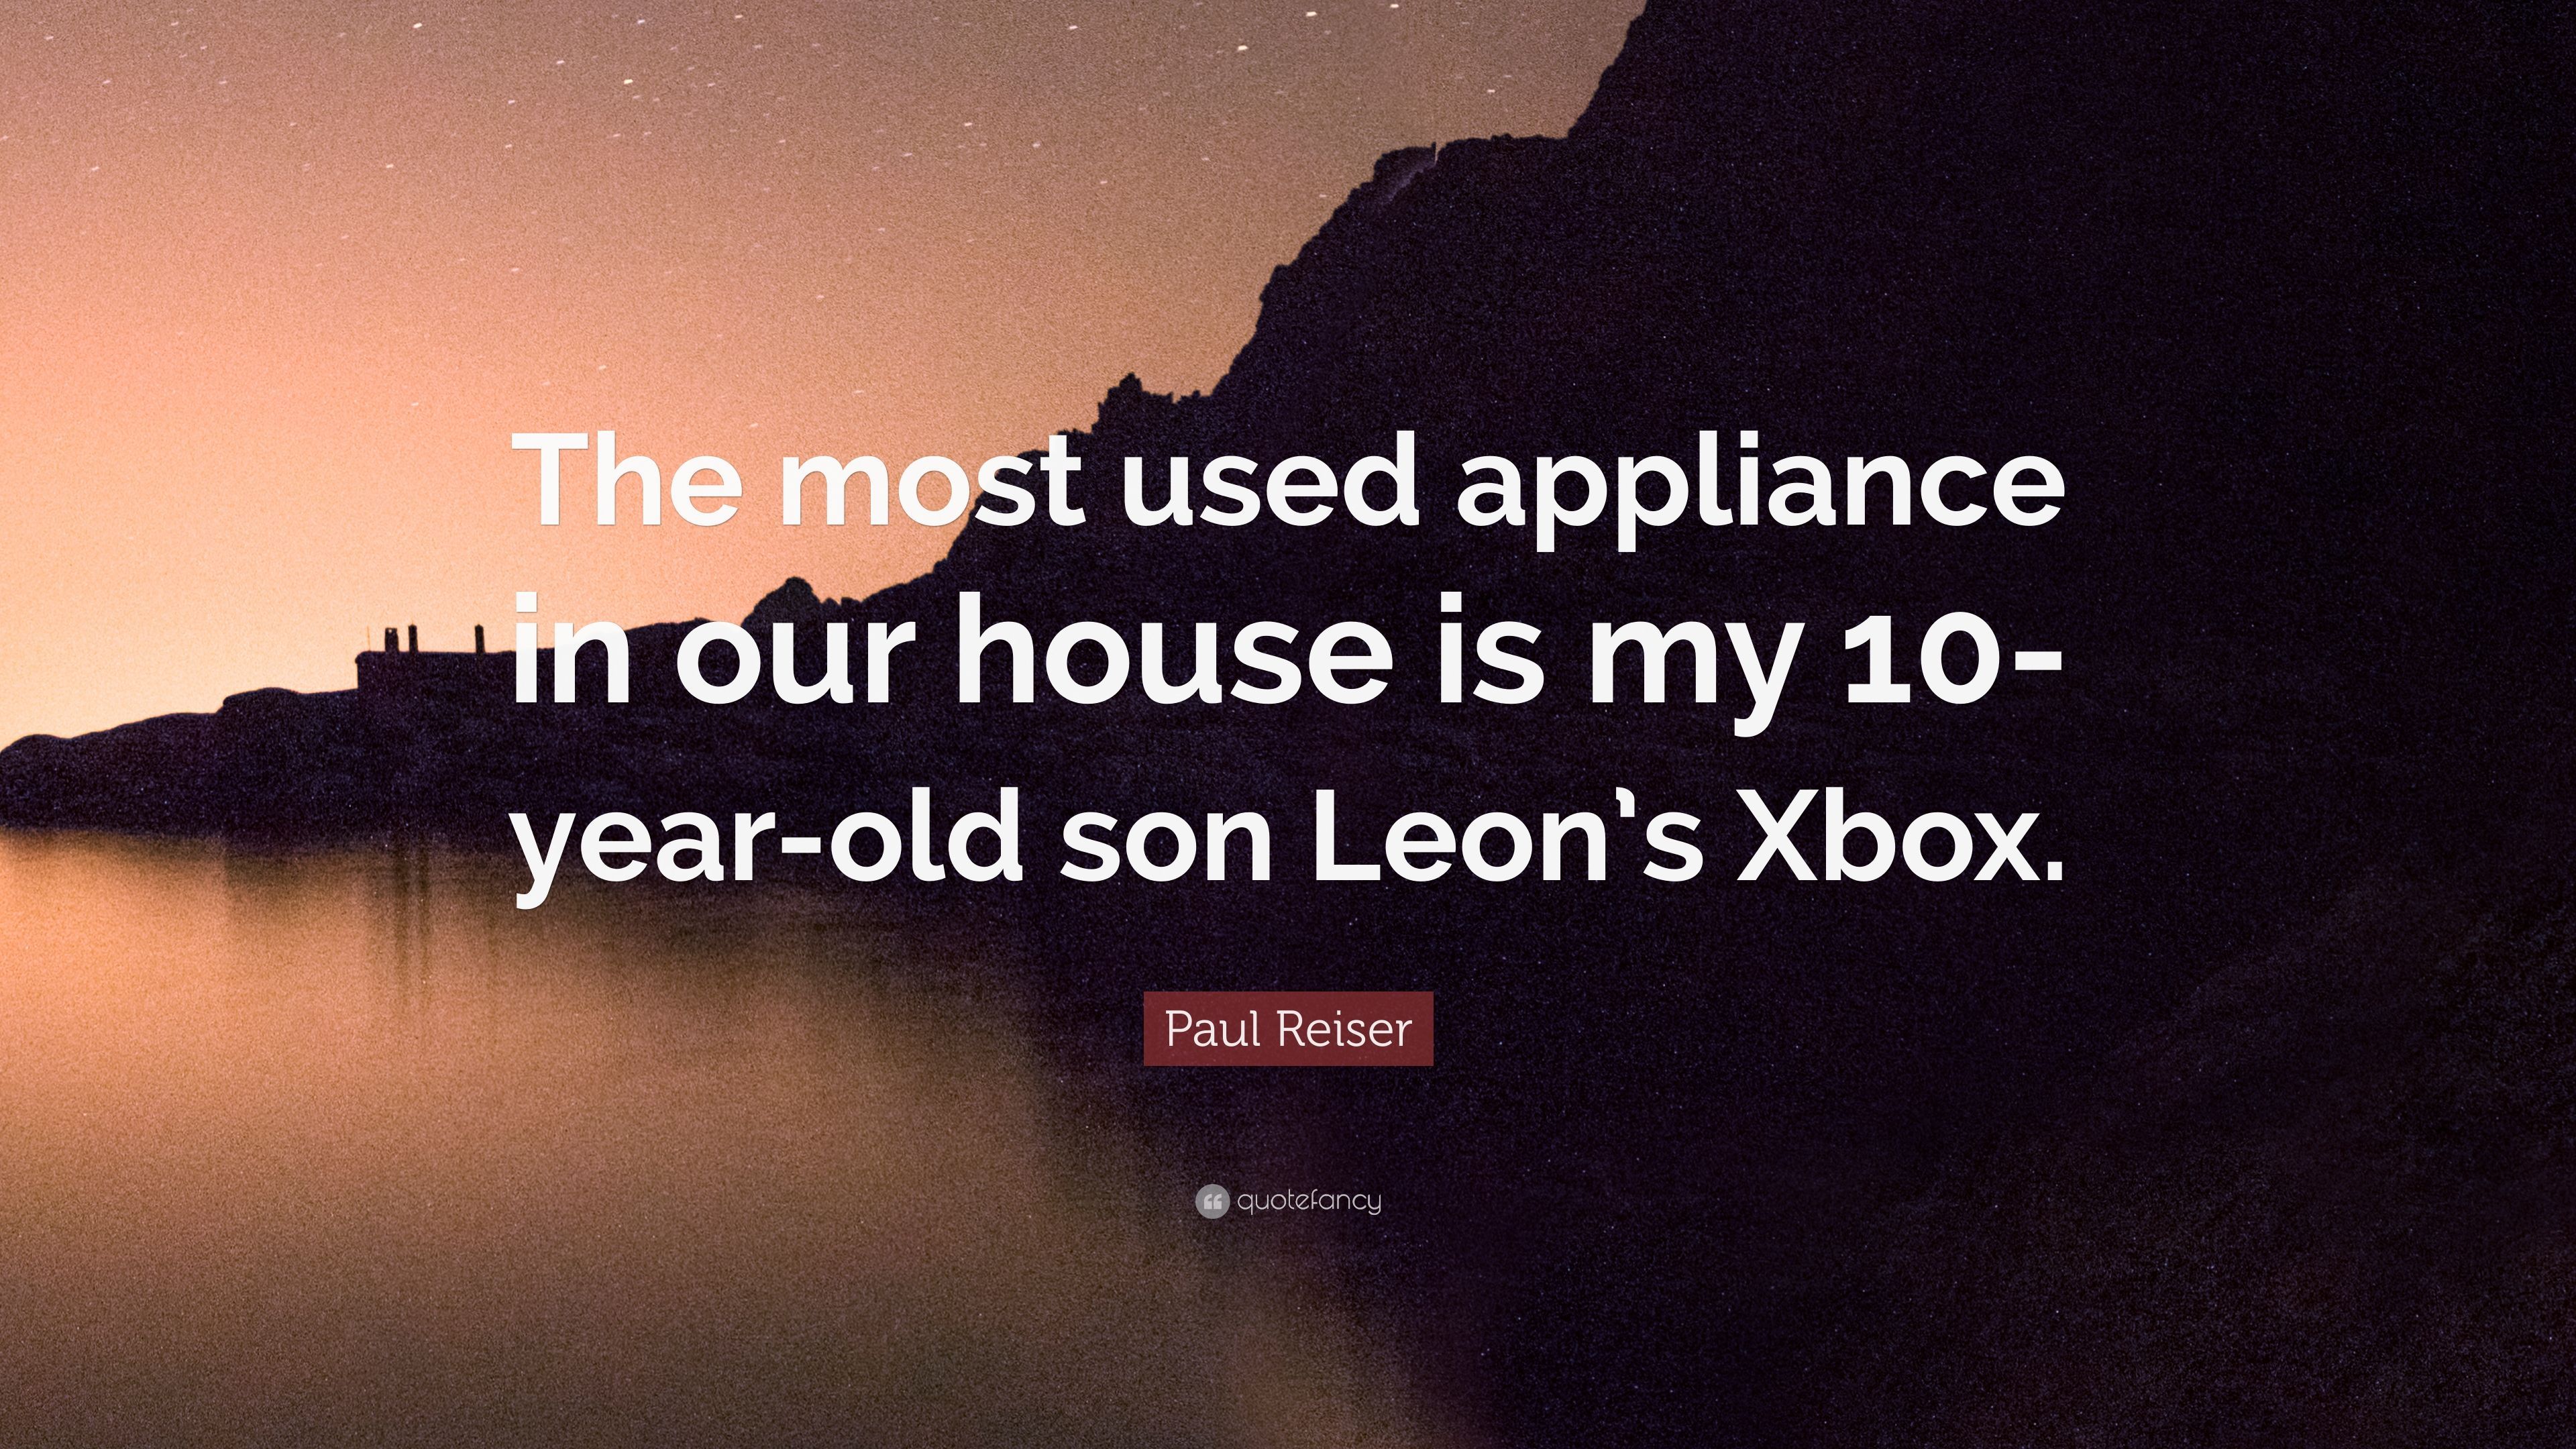 Paul Reiser Quote: “The most used appliance in our house is my 10